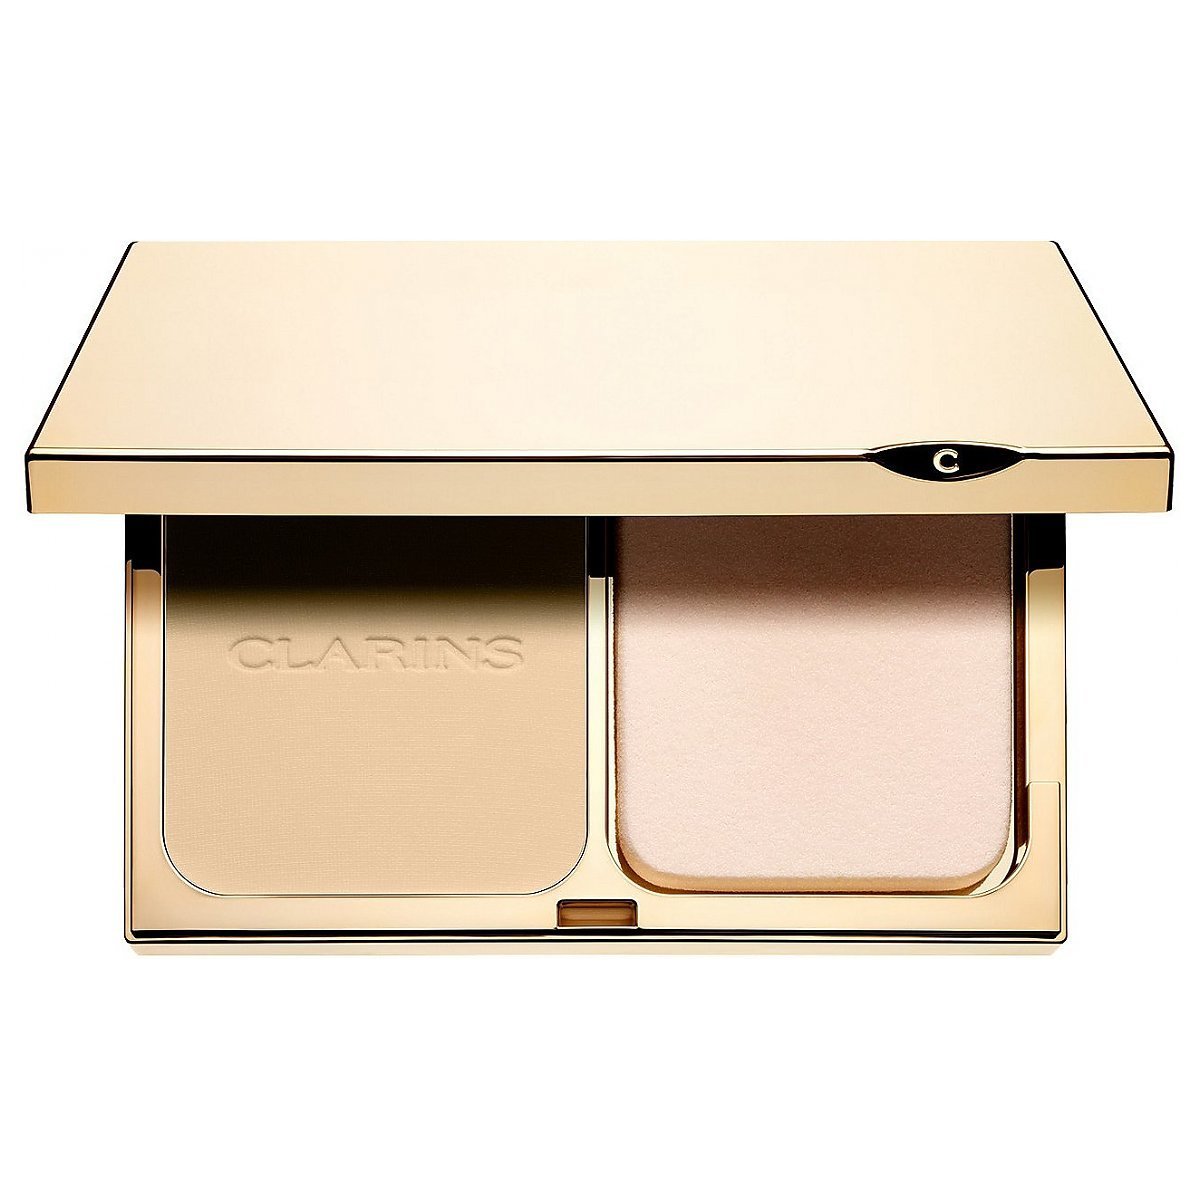 Clarins Everlasting Compact Foundation SPF9 #105 Nude